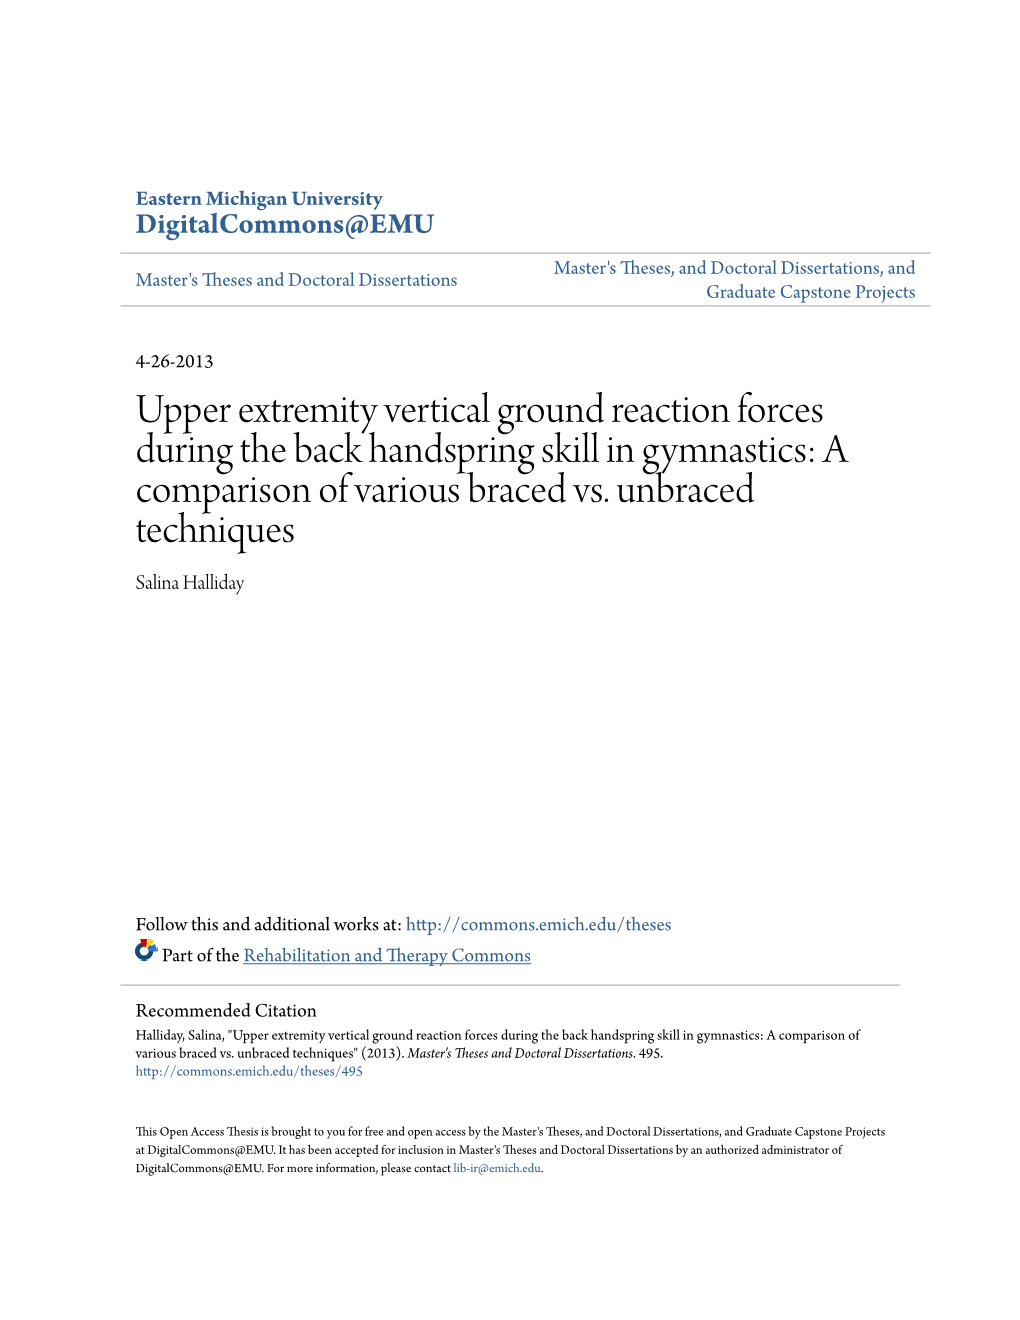 Upper Extremity Vertical Ground Reaction Forces During the Back Handspring Skill in Gymnastics: a Comparison of Various Braced Vs